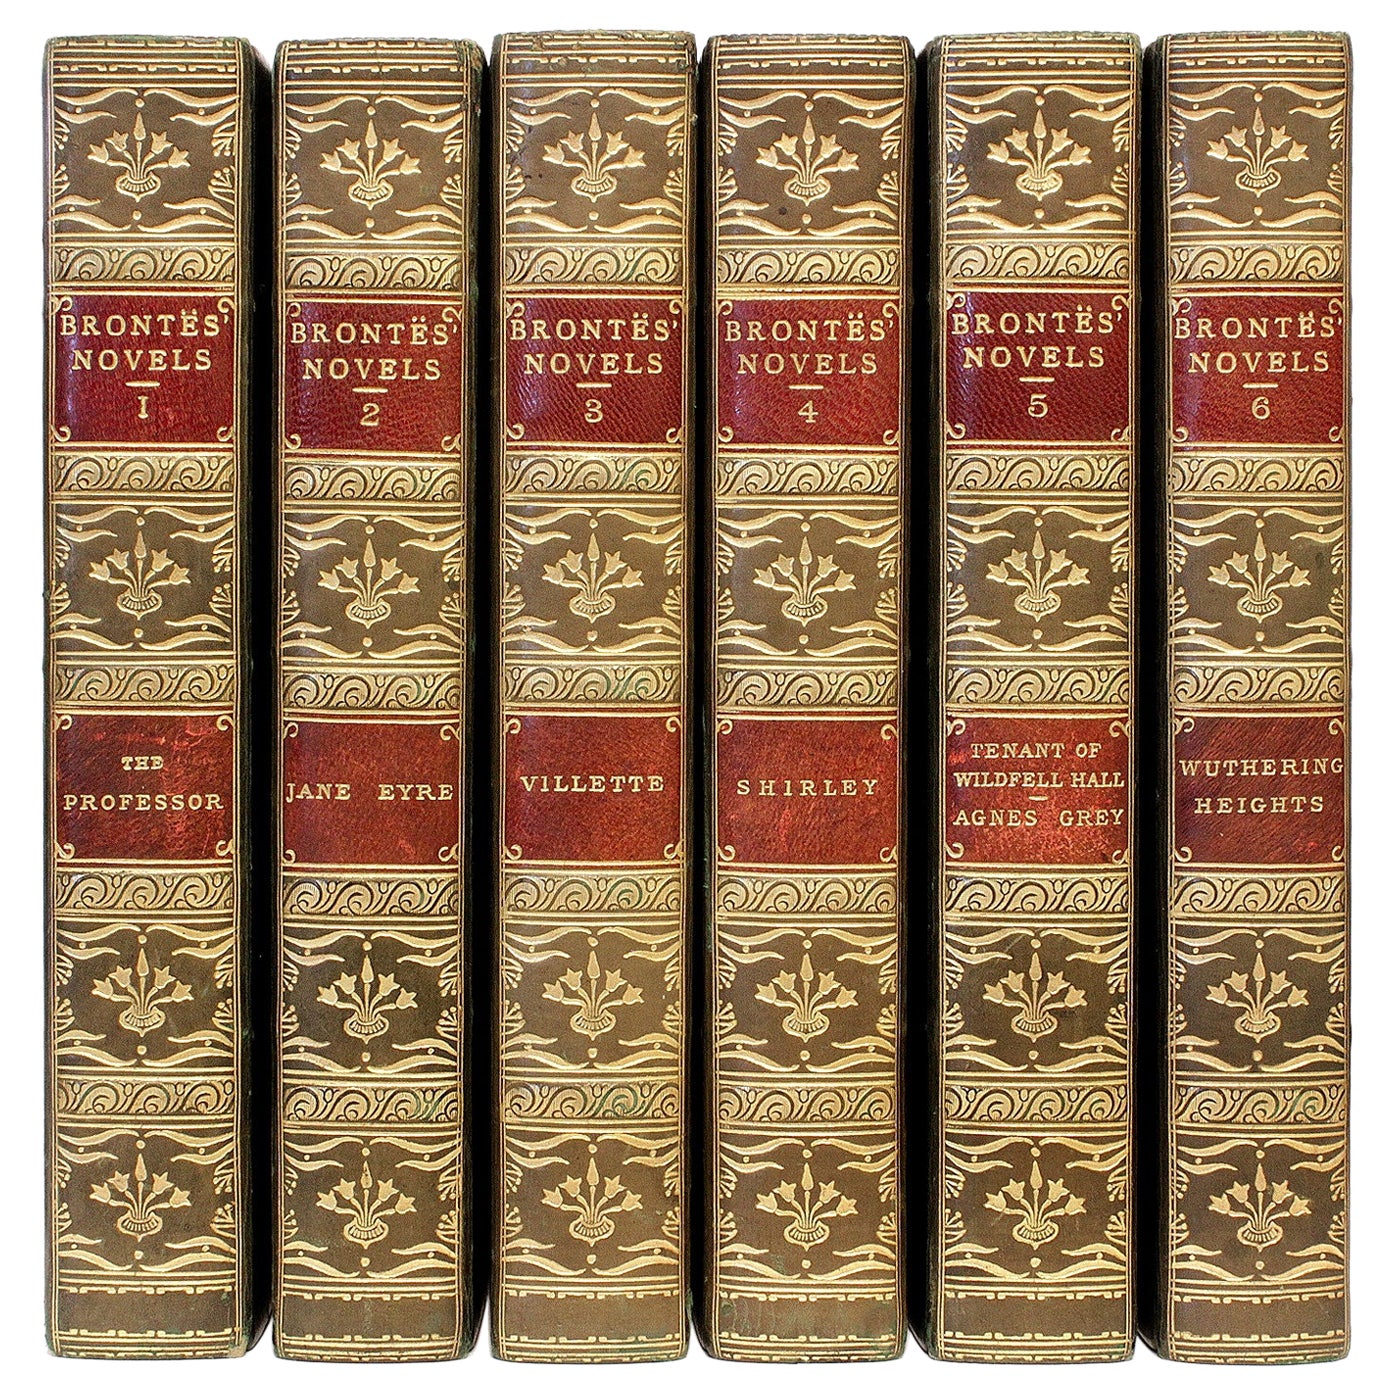 Novels of Charlotte, Emily, & Anne Bronte - 6 Vols - 1922 - ILLUSTRATED BY DULAC For Sale